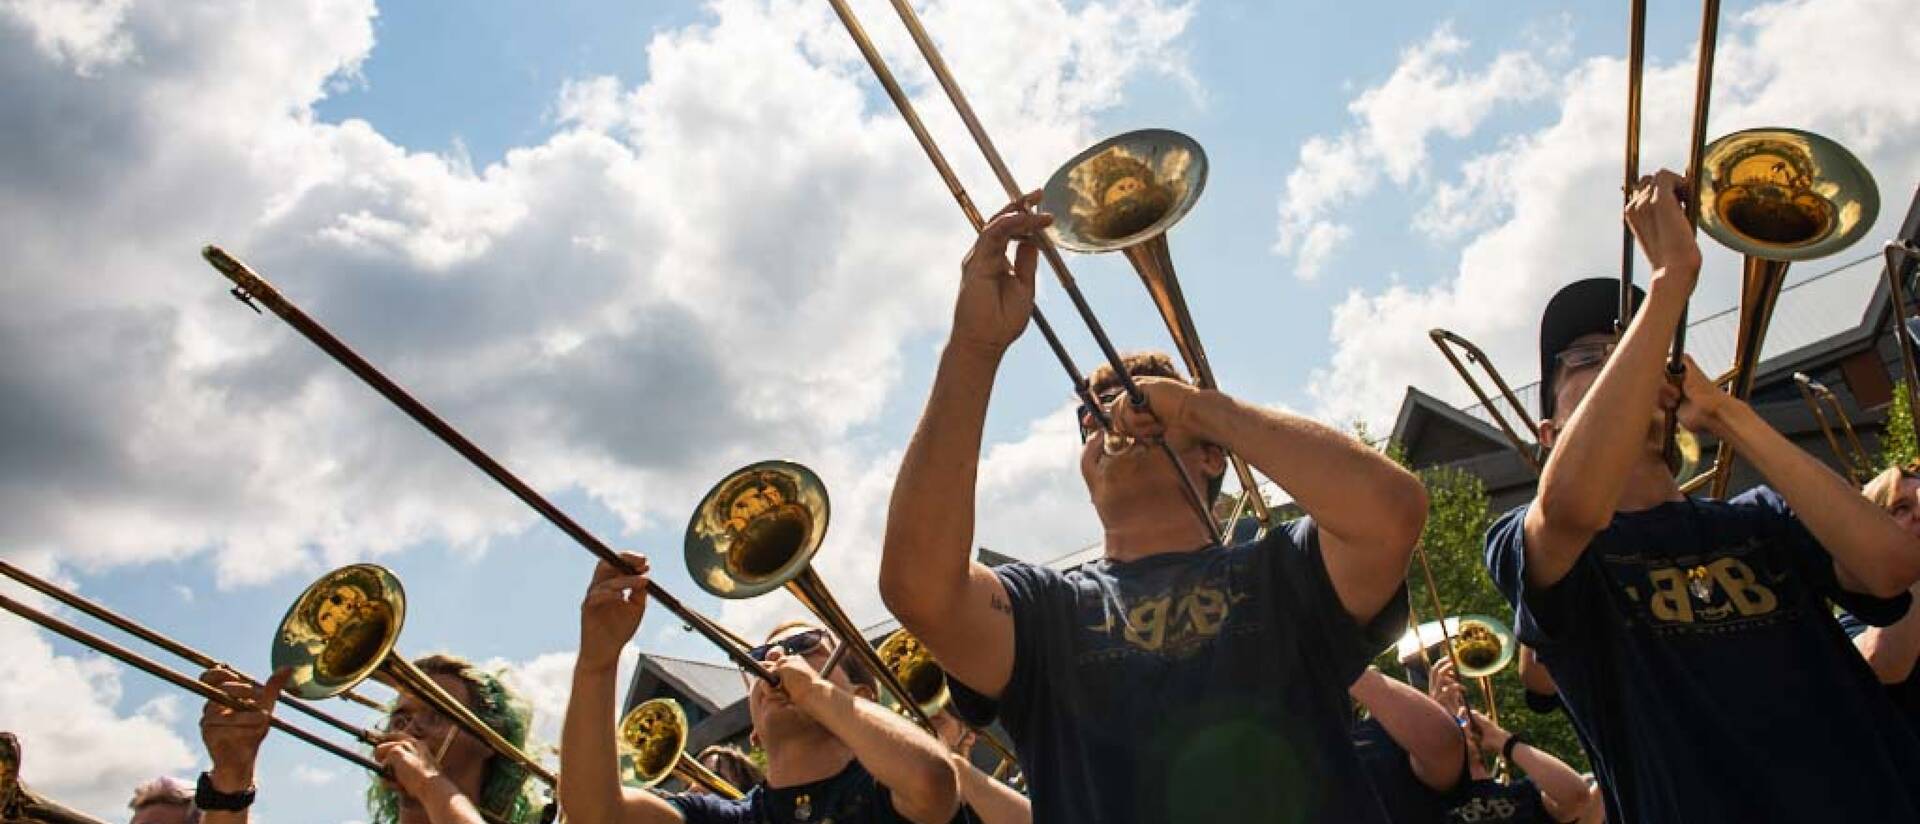 Horns playing in a marching band with sky in the background.